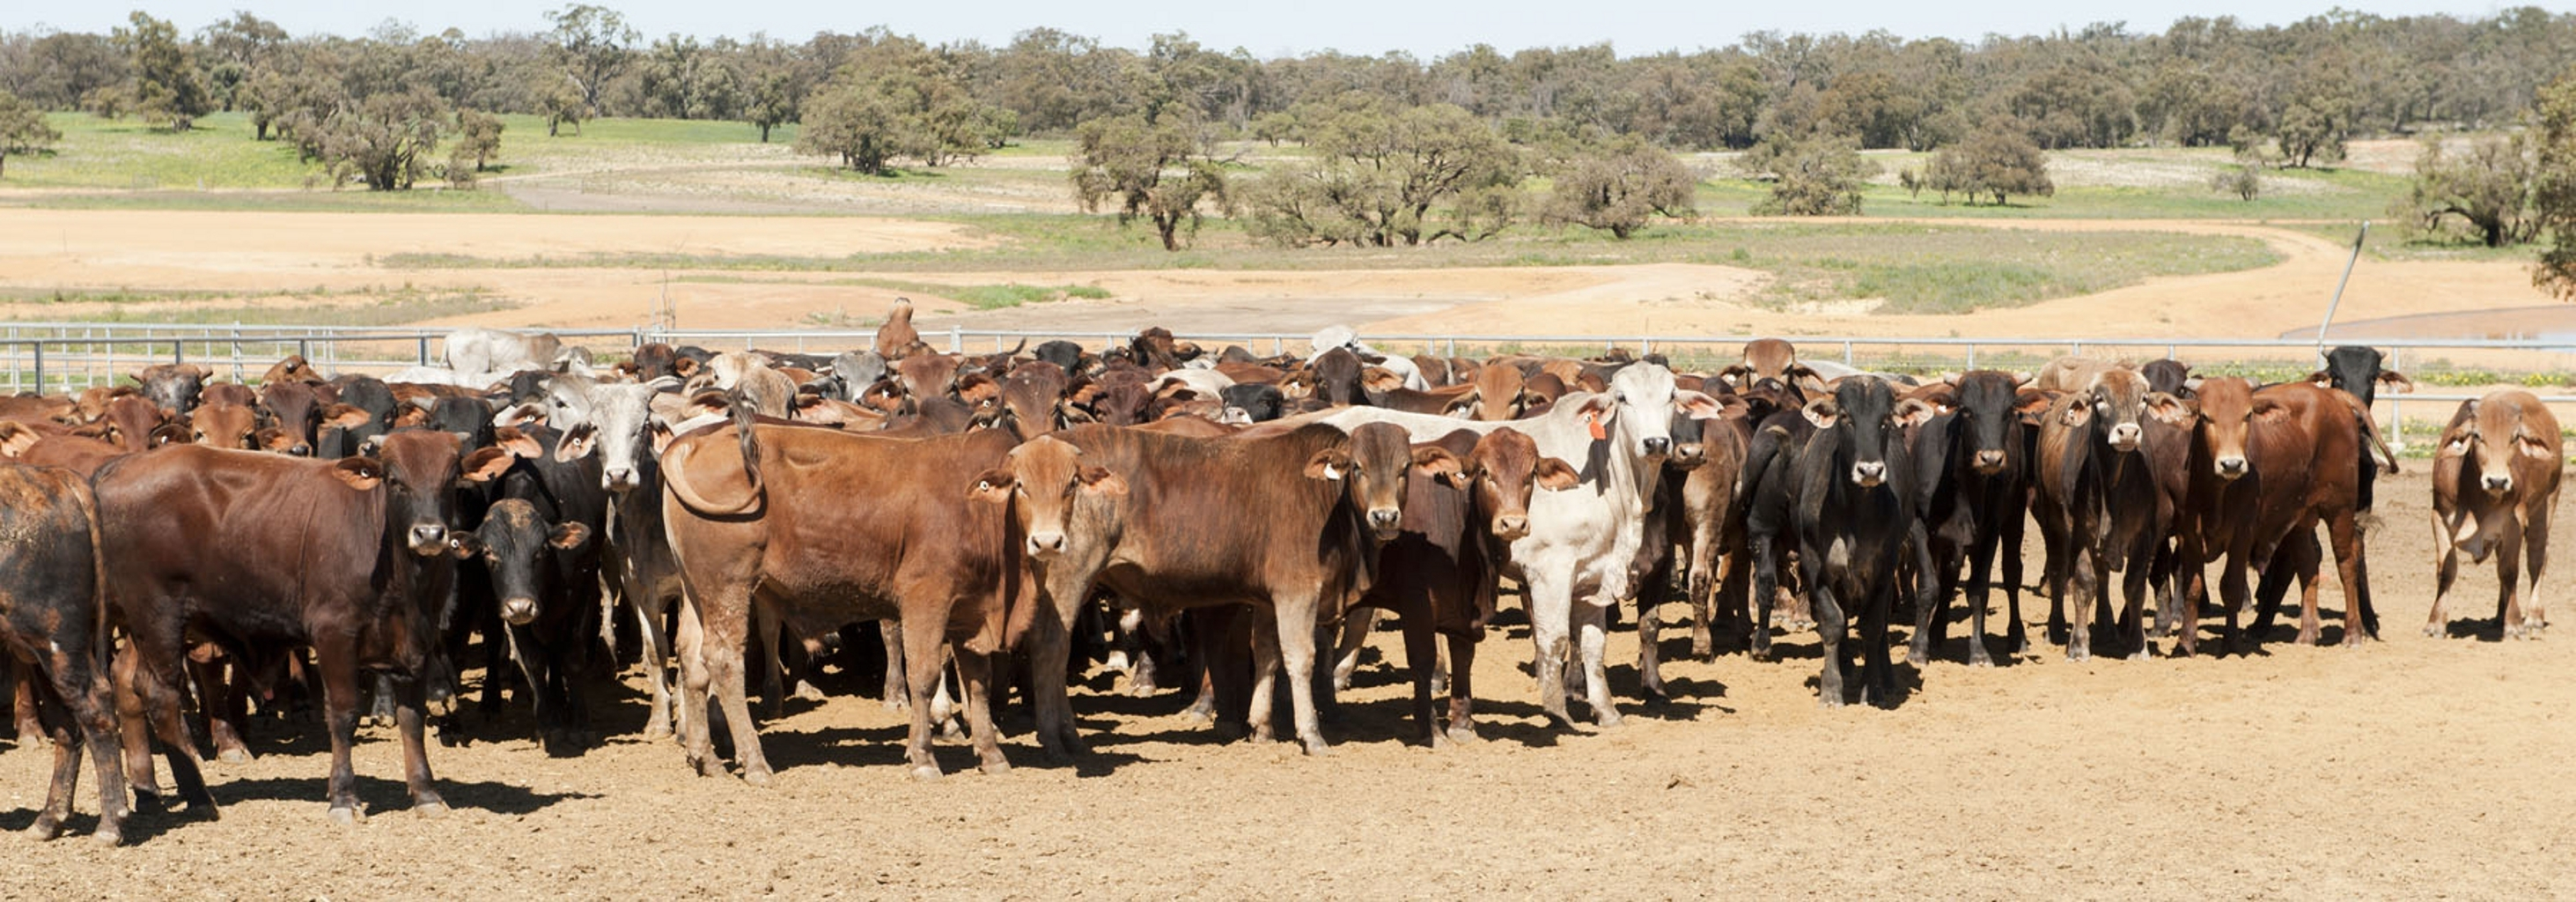 Importing livestock into Western Australia | Agriculture and Food